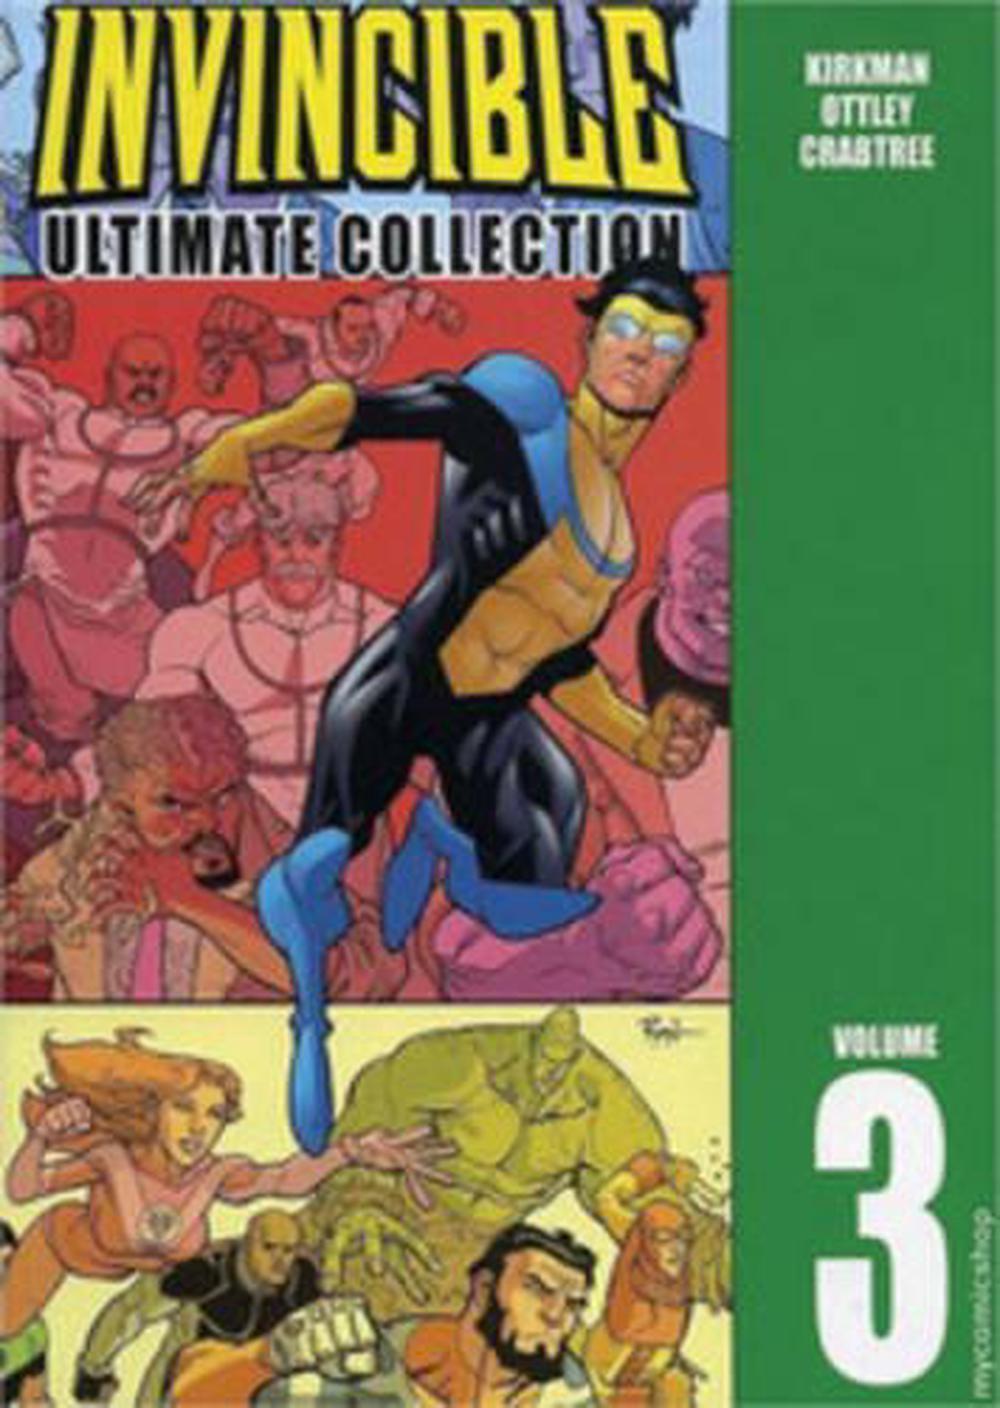 Invincible: The Ultimate Collection Volume 3 by Robert Kirkman (English) Hardcov